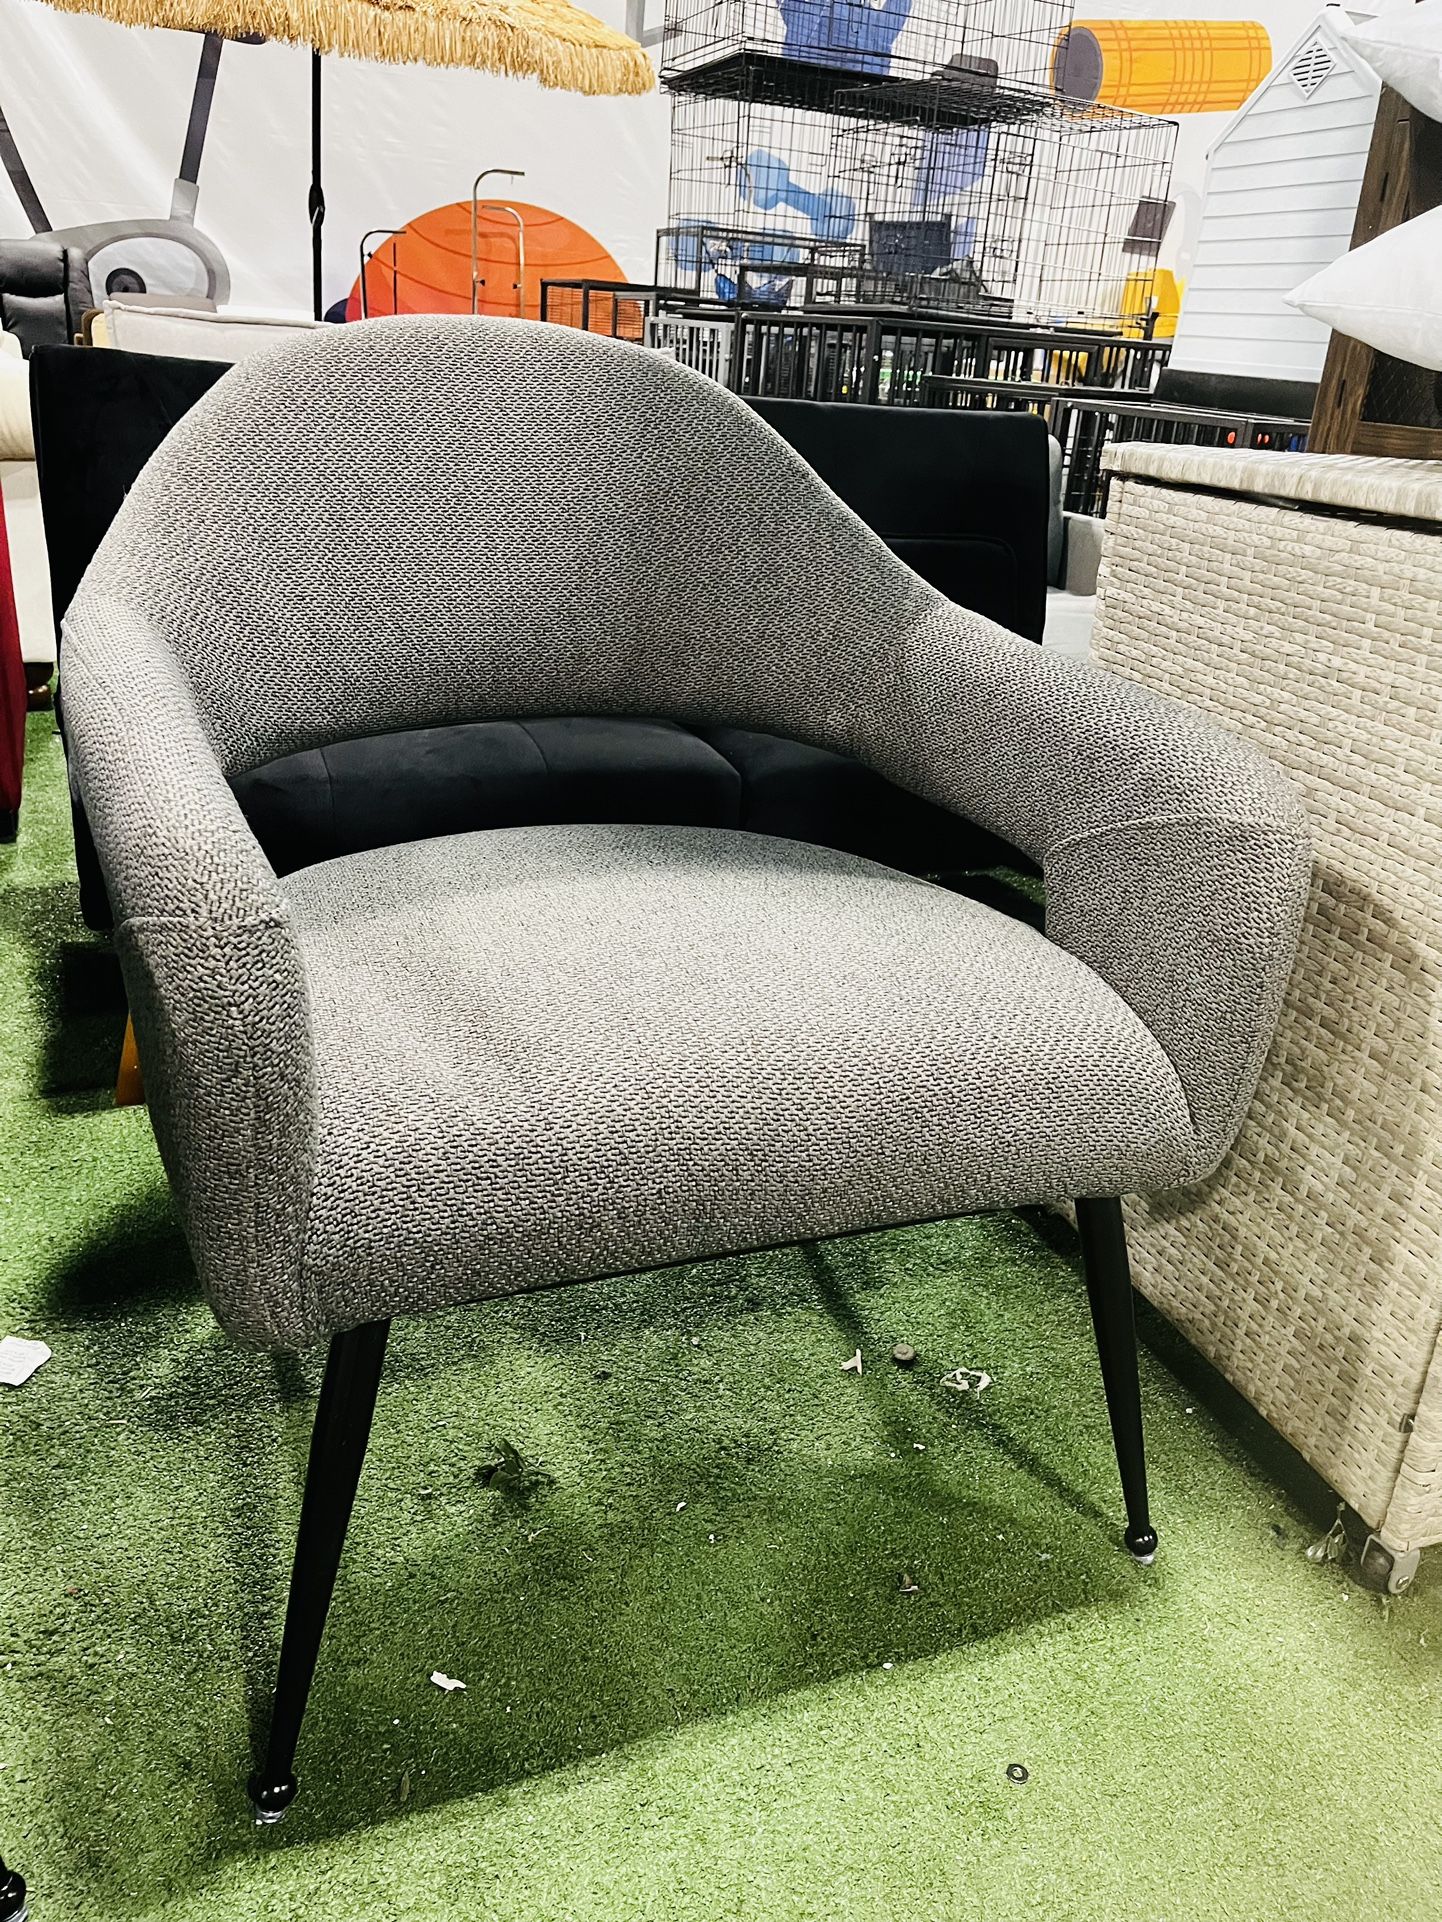 Brand new Comfort Modern Dining Chair, living room chair, 30 x 32 x 34in, Gray color, $80 each